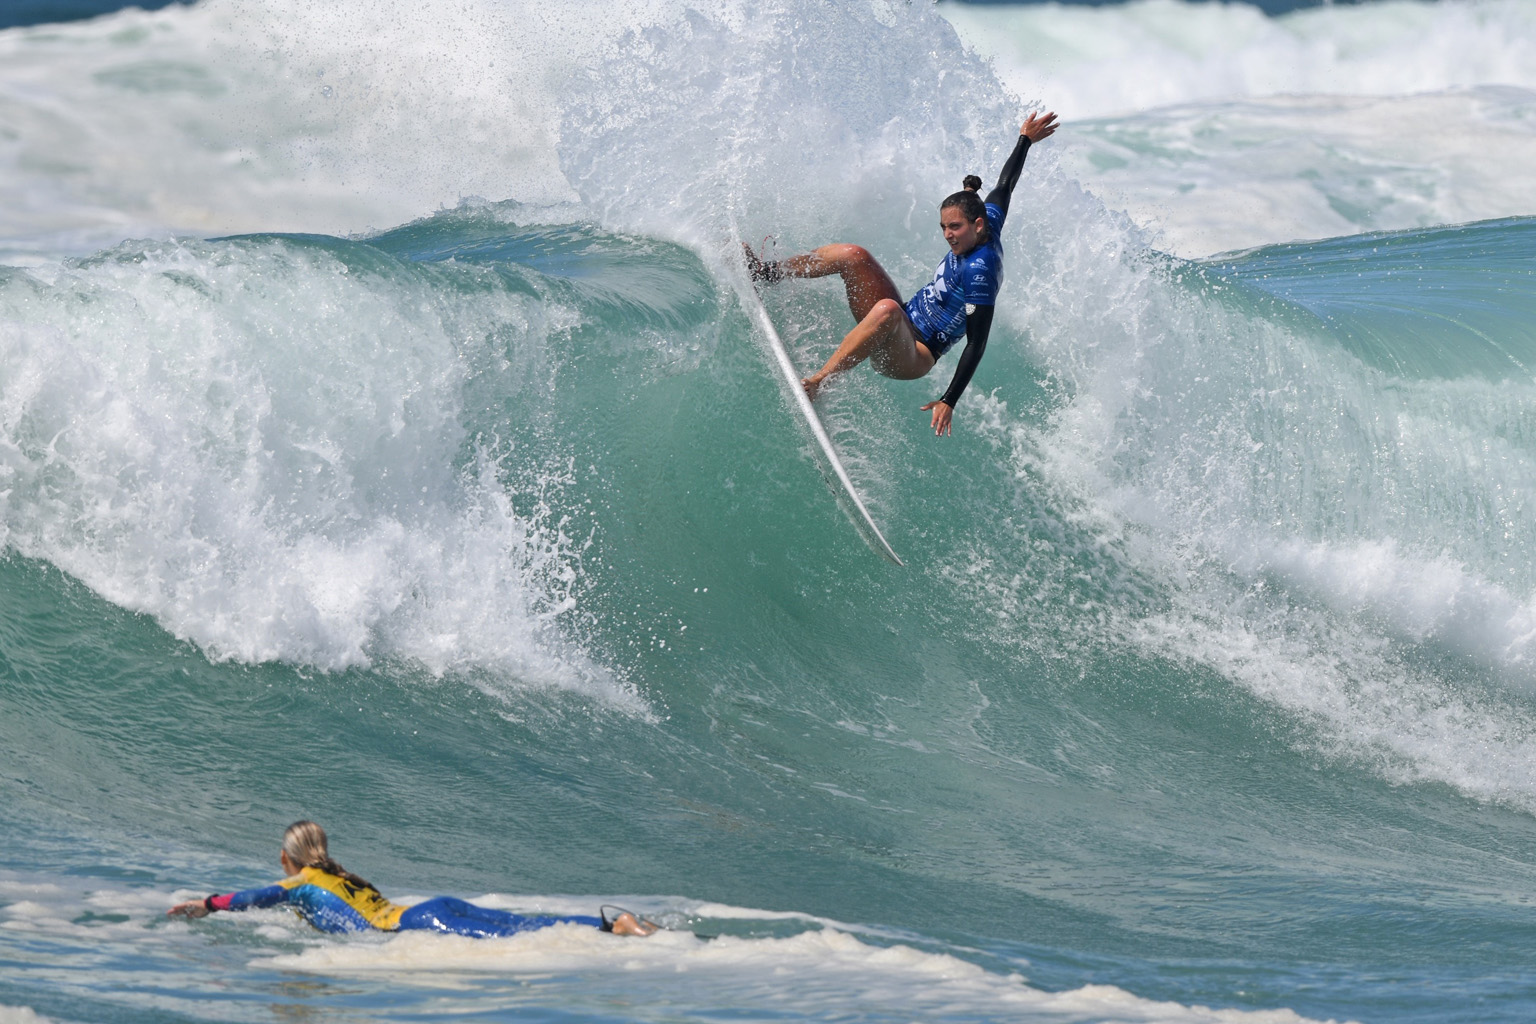 A woman surfs high on a wave while another woman paddles on her surfboard in the foreground